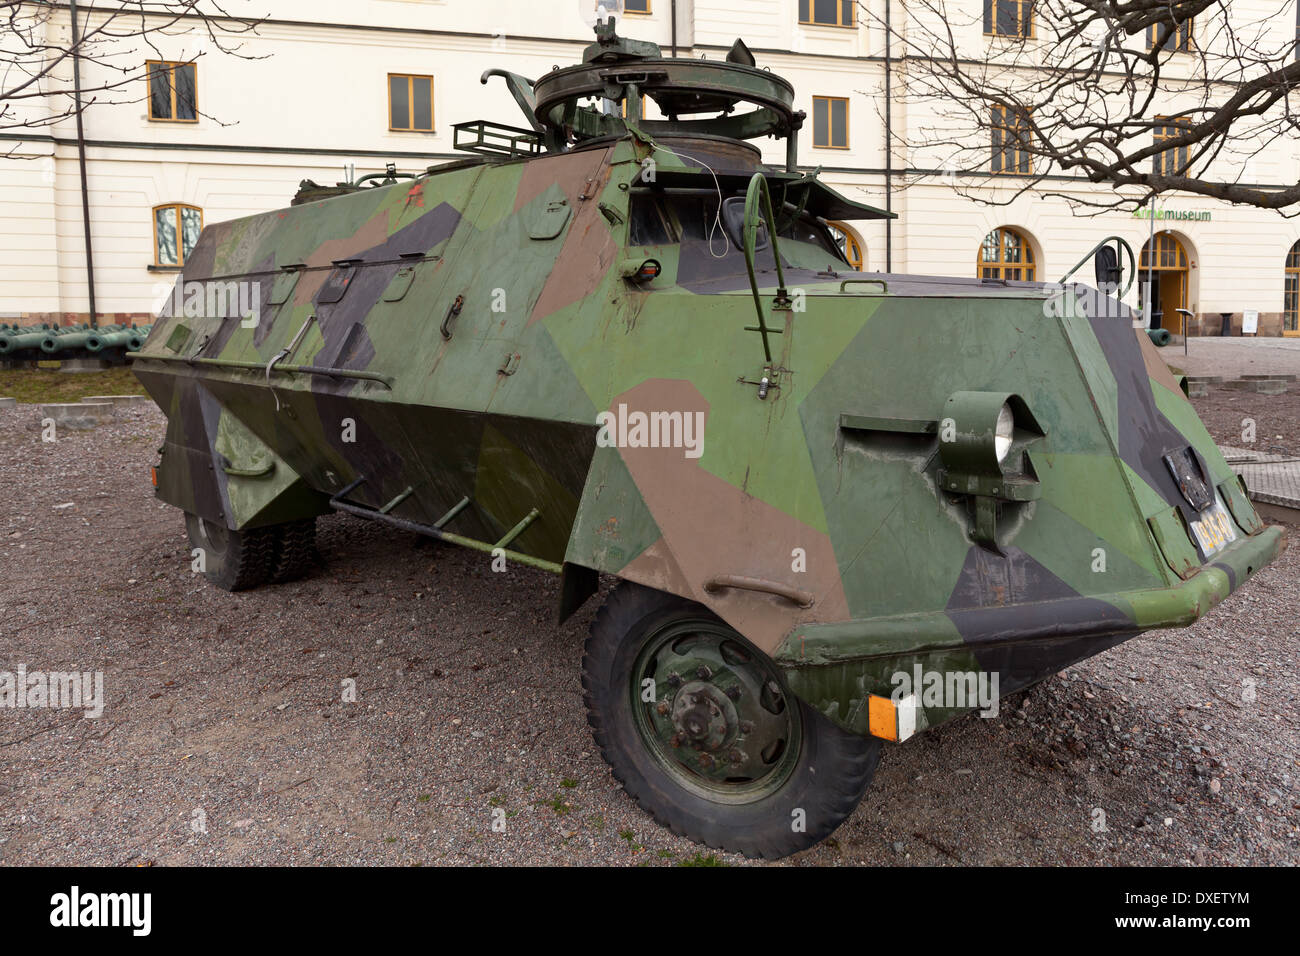 Stockholm, Sweden - KP-bil (KP transport vehicle) at the Armémuseum (army museum) Östermalm Stock Photo